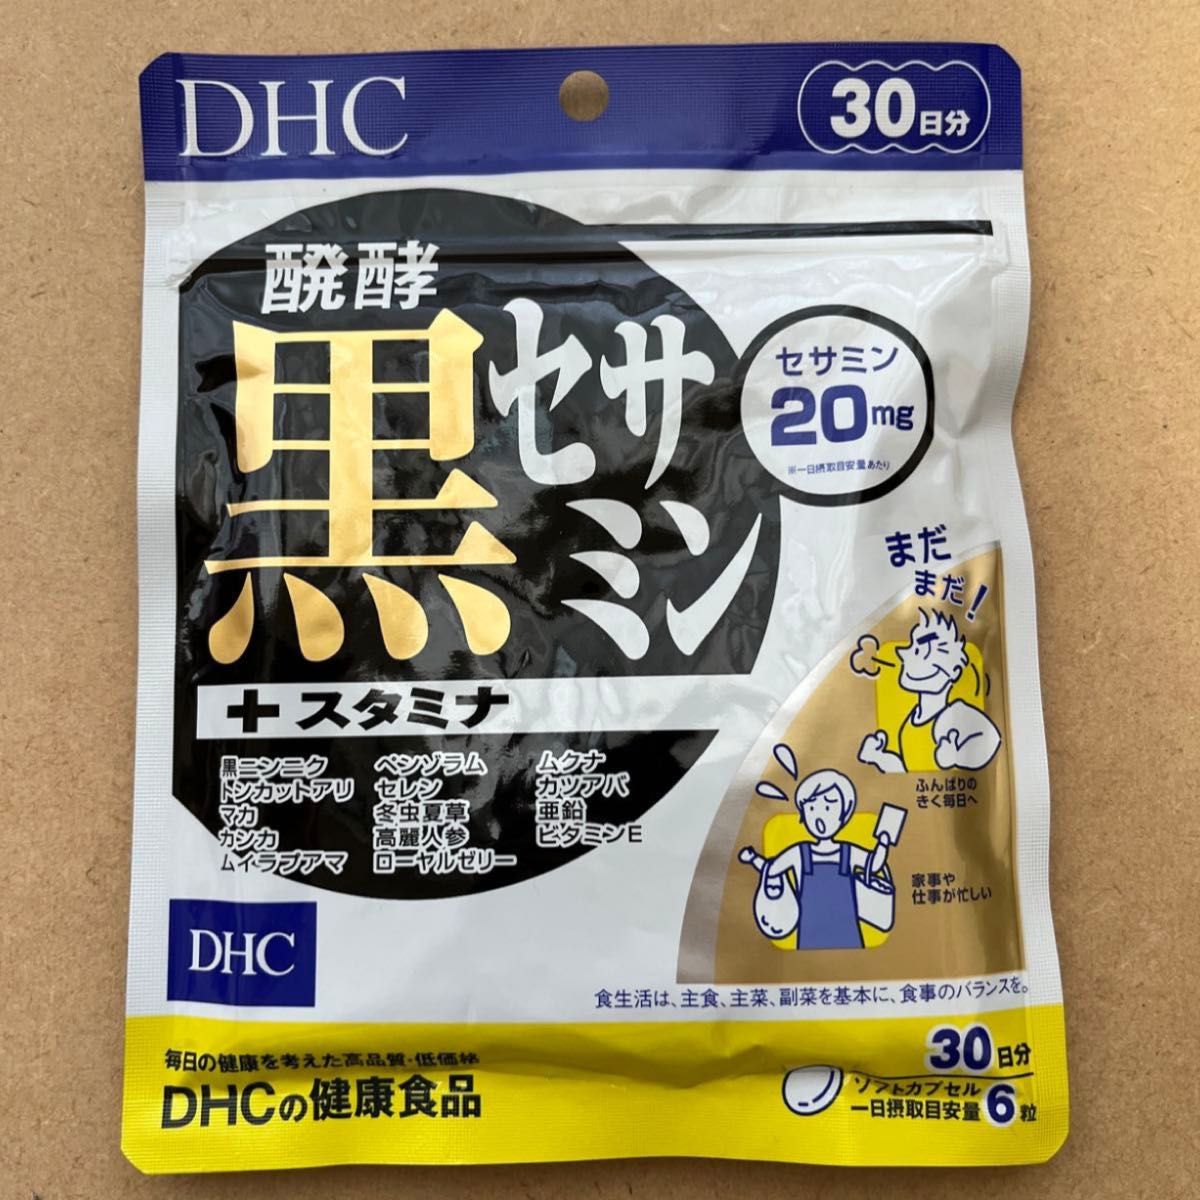 DHC 黒セサミン 30日分 1袋　